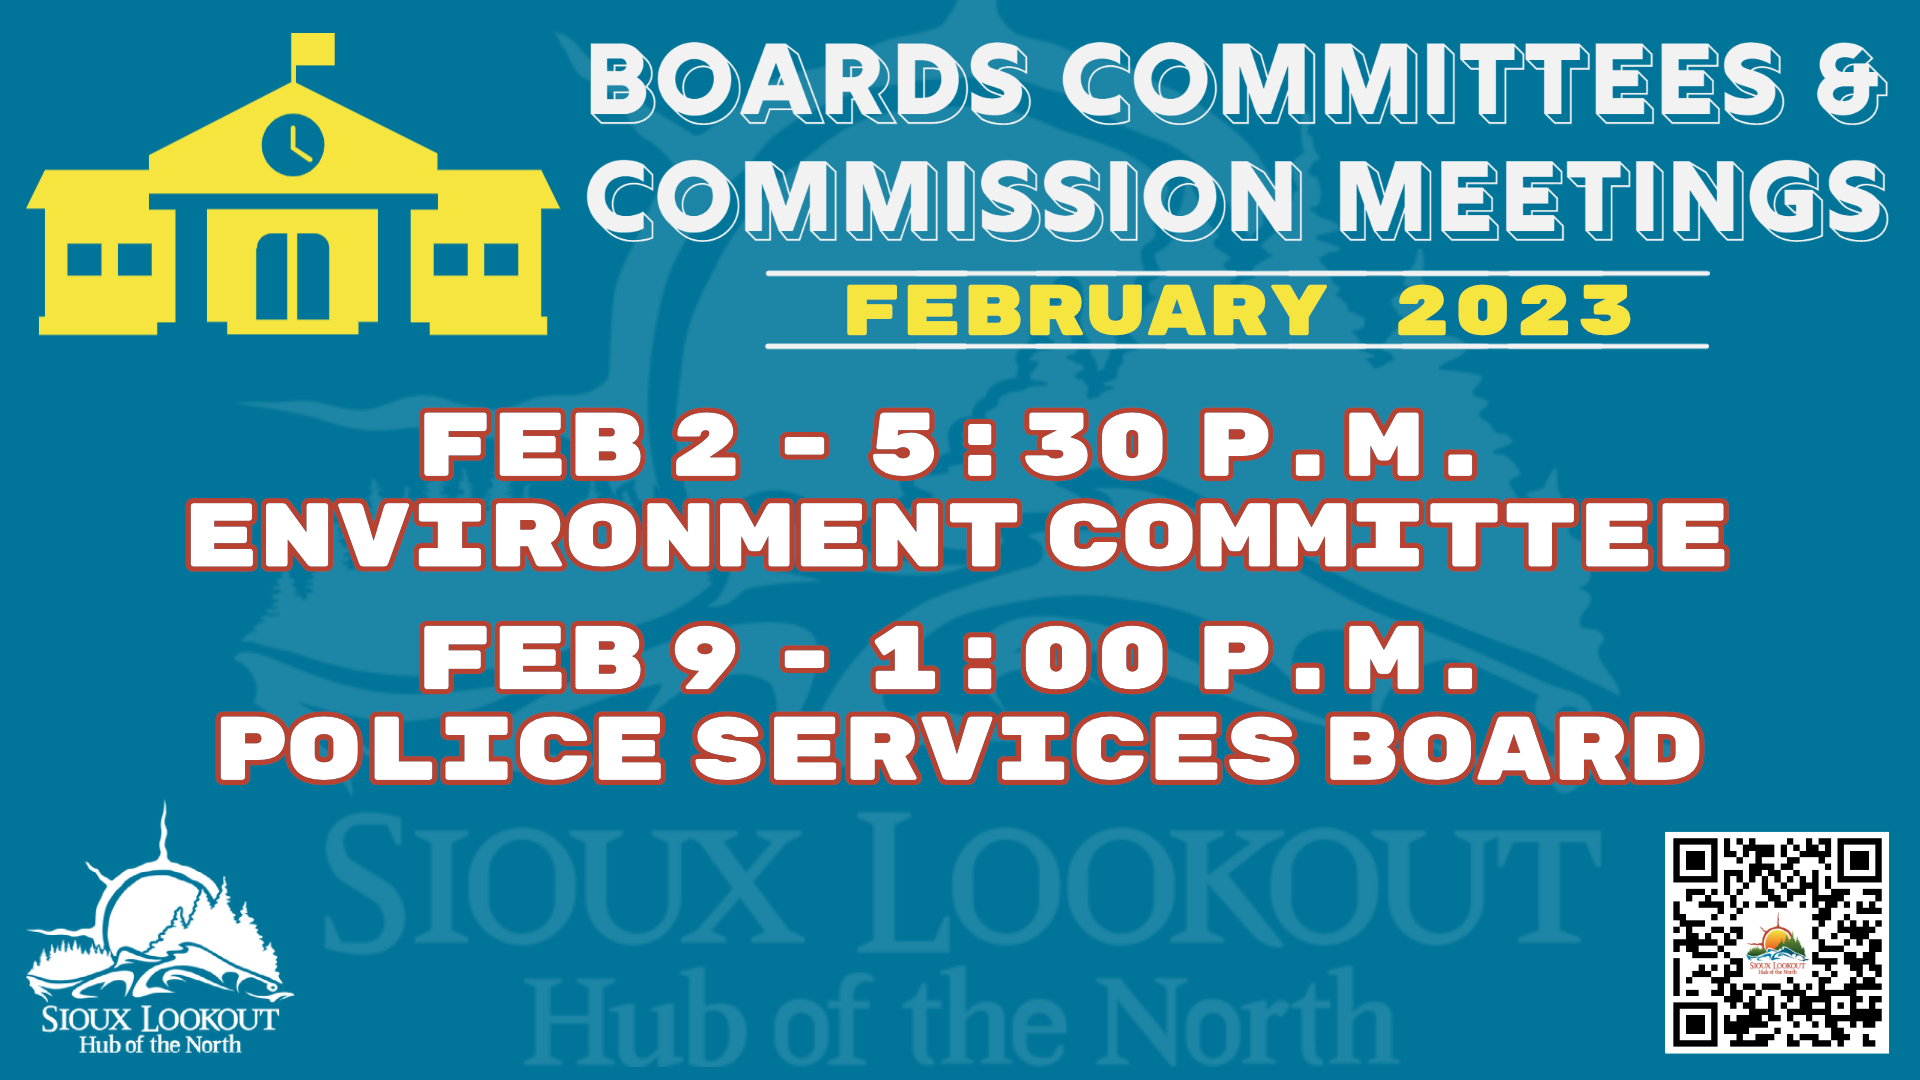 Board and Committee Meetings - February 2023